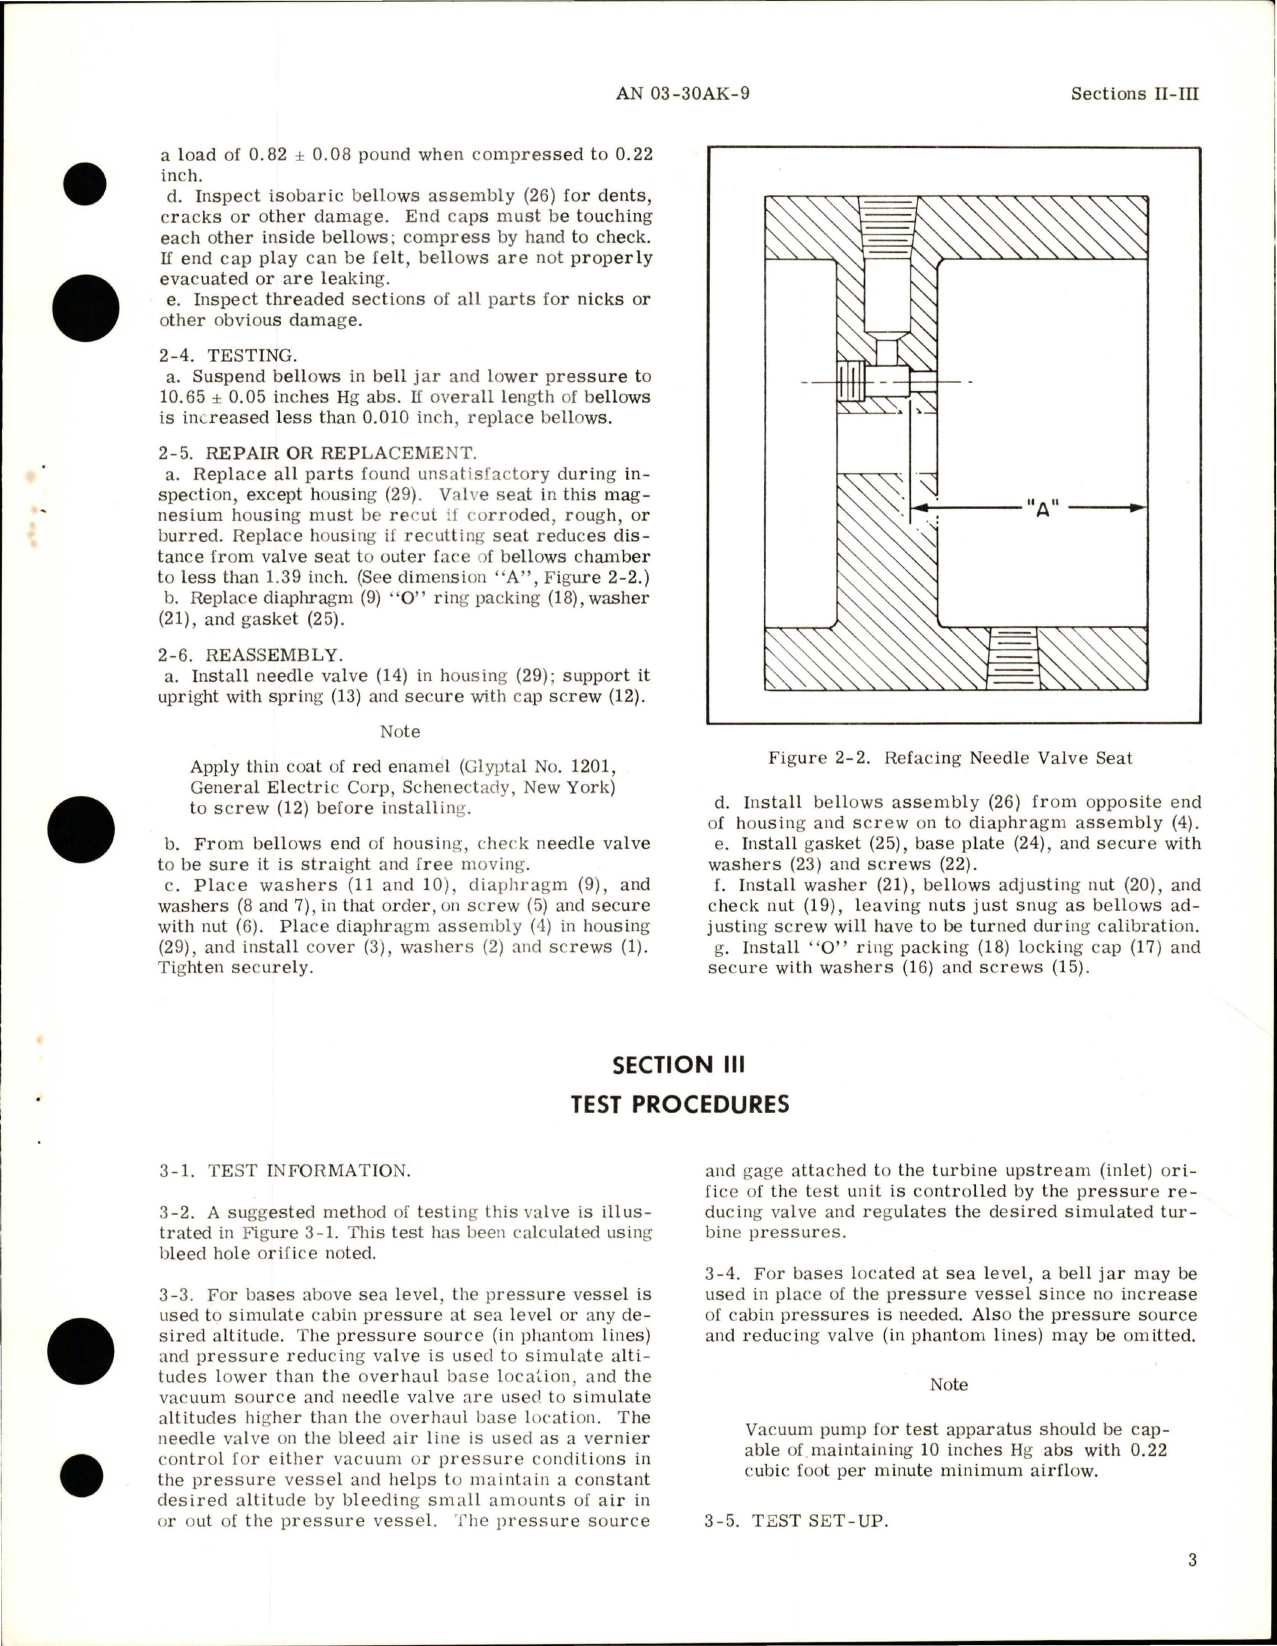 Sample page 5 from AirCorps Library document: Overhaul Instructions for Pressure Ratio Valve Controls 